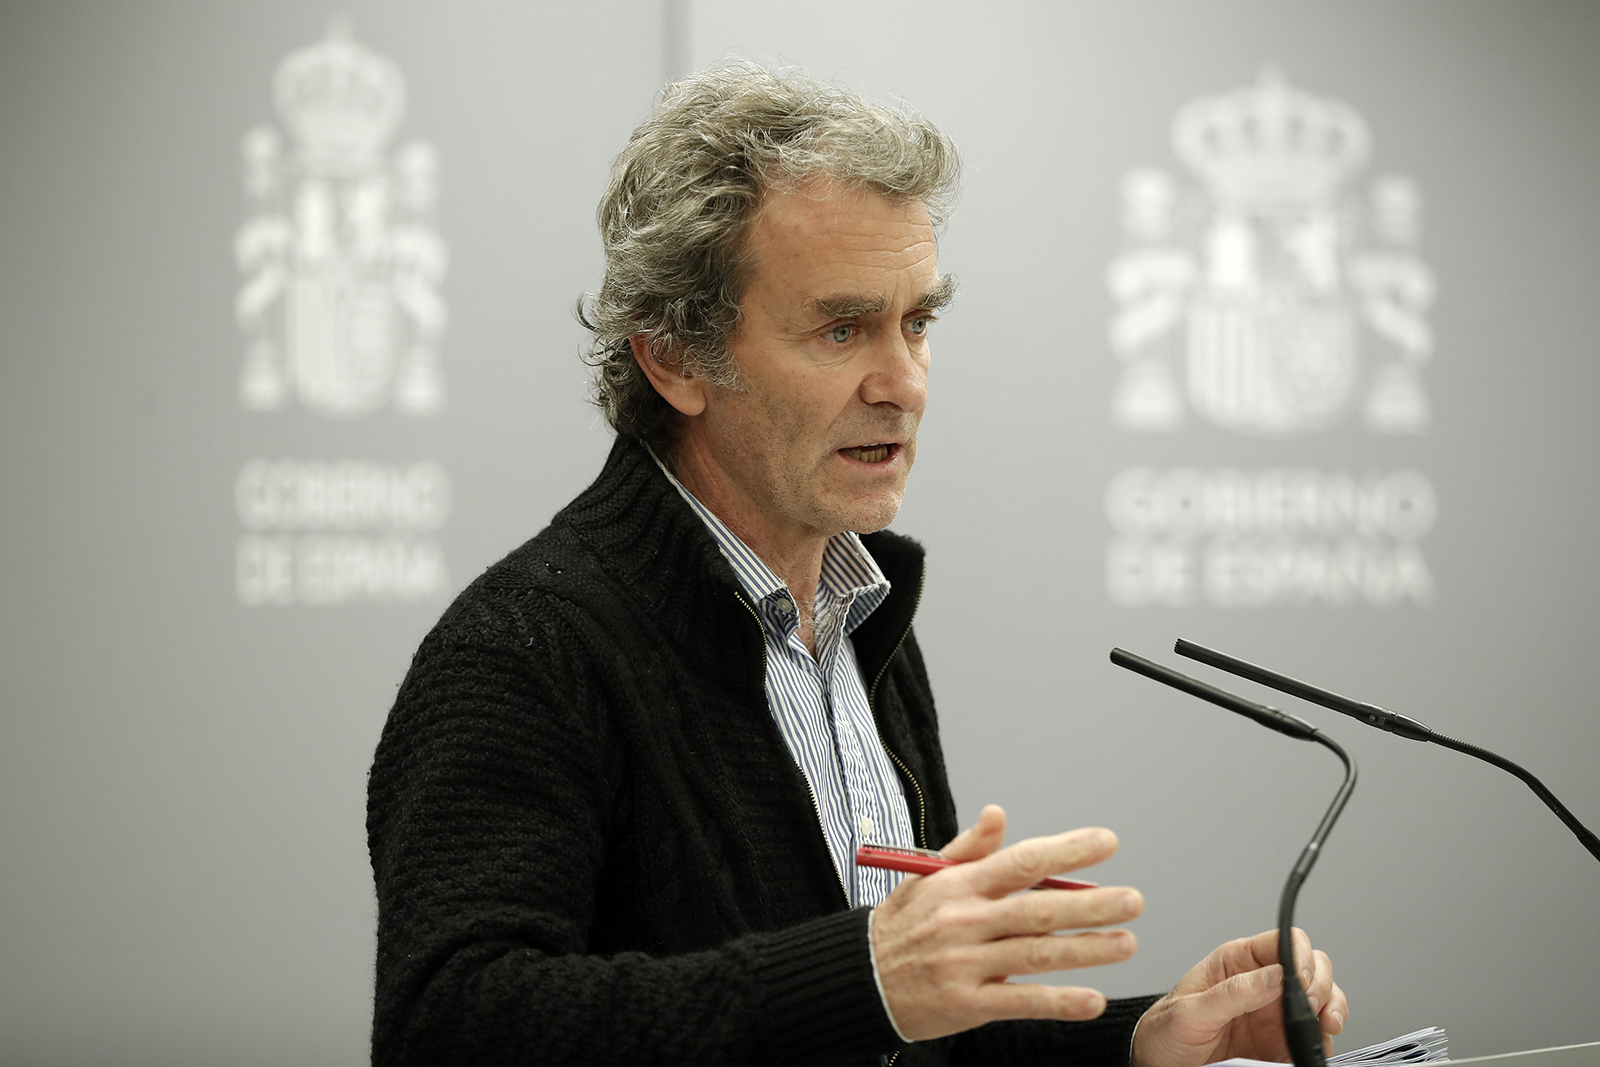 Dr. Fernando Simón, Spain’s director of the Center for Health Emergencies, holds a press conference on the latest developments of the coronavirus (COVID-19) outbreak in Madrid, Spain on March 11.